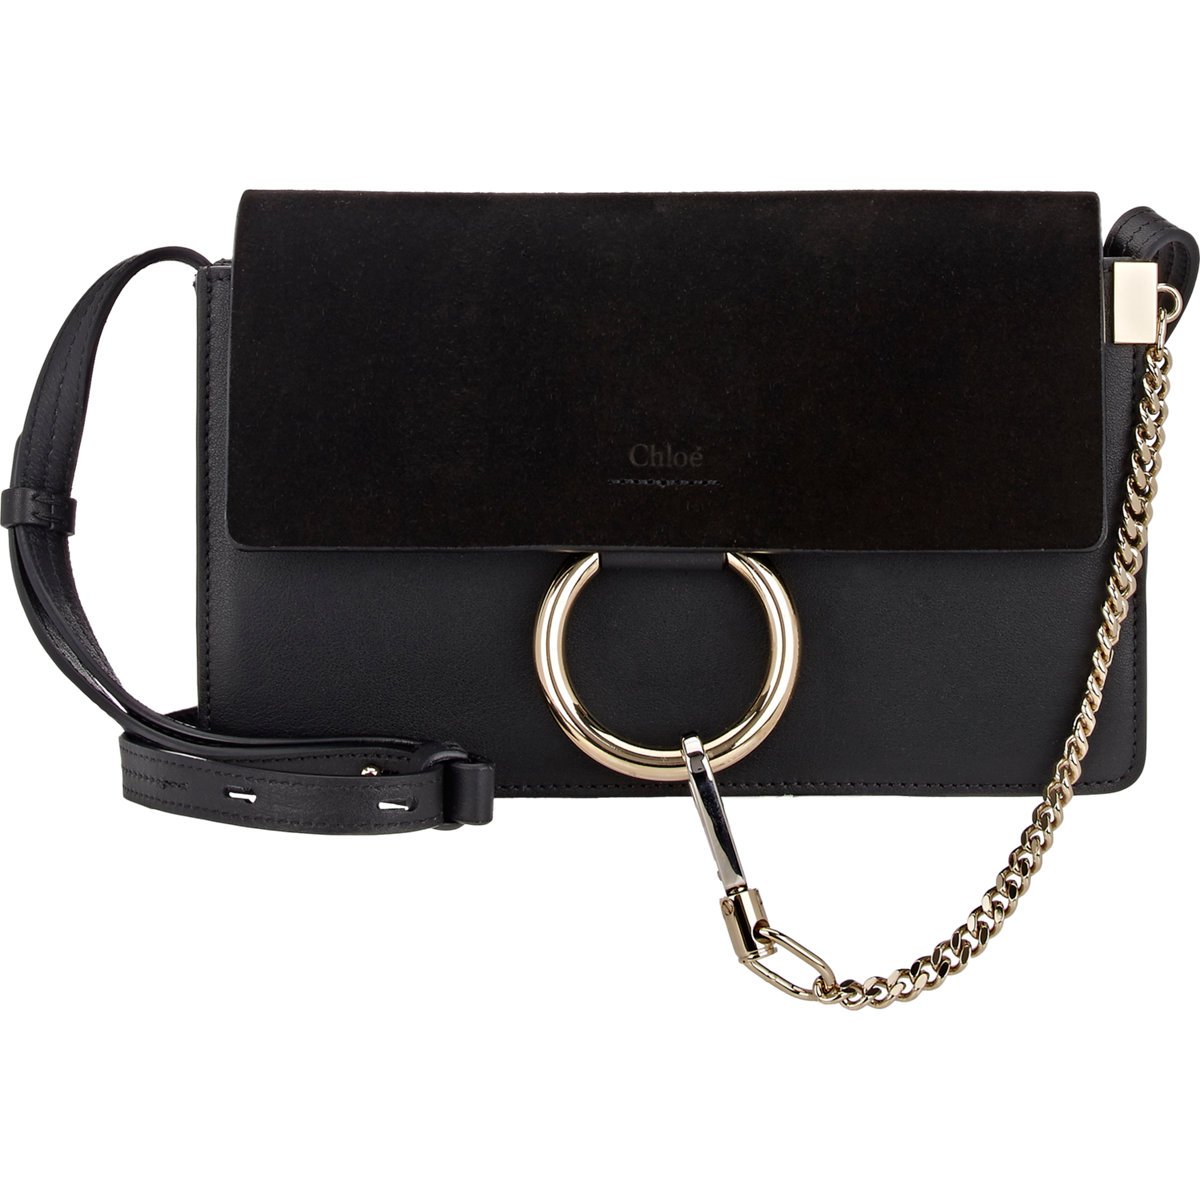 real chloe handbags - Chlo Faye Small Leather and Suede Shoulder Bag in Black | Lyst